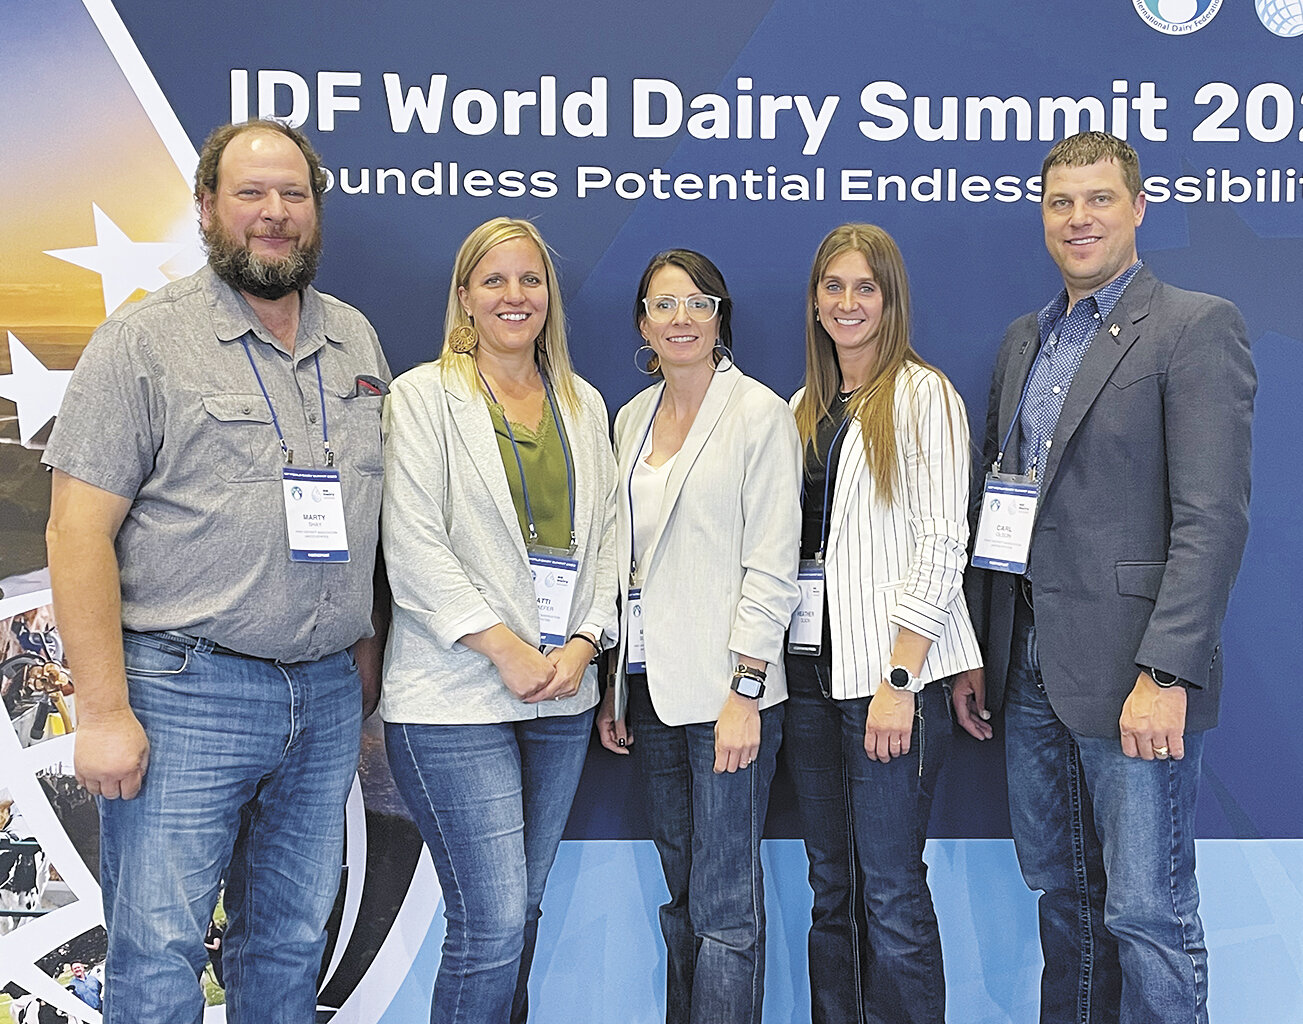 Marty Shay (from left), Patti Schaefer, director of milk marketing and member services at First District Association, Megan Schrupp, and Heather and Carl Olson pause for a group photo Oct. 18 at the International Dairy Federation World Dairy Summit in Chicago. Dairy farmers Shay, Schrupp and the Olsons attended the summit with support from First District Association as members of its Young Cooperator program.